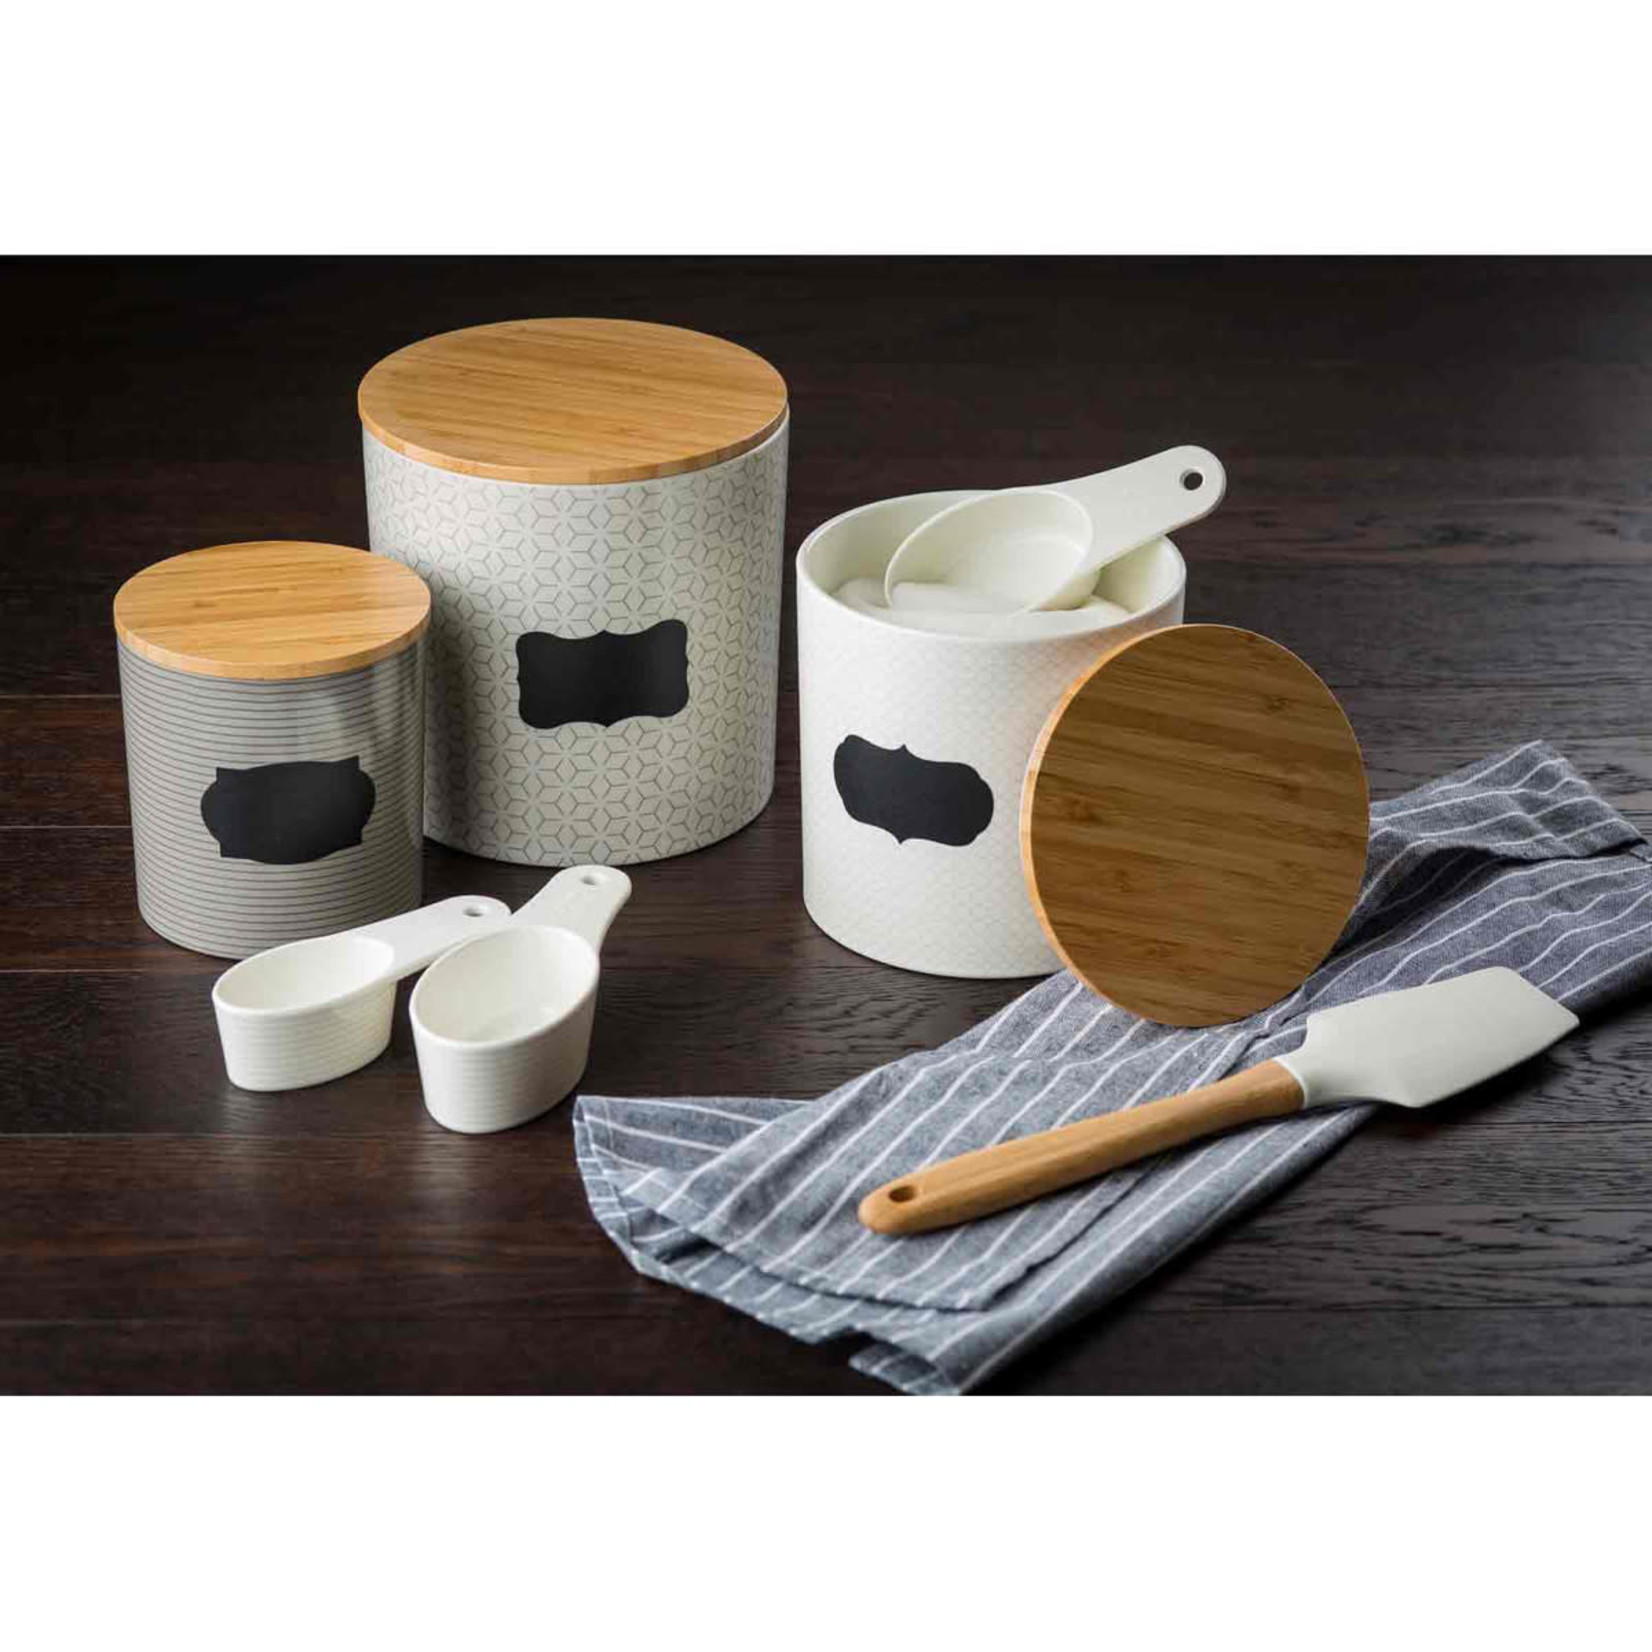 TableCraft Crofthouse Collection(TM) Measuring Cups, Set of 4, Includes: 1/4, 1/3, 1/2 & 1 Cup, Melamine